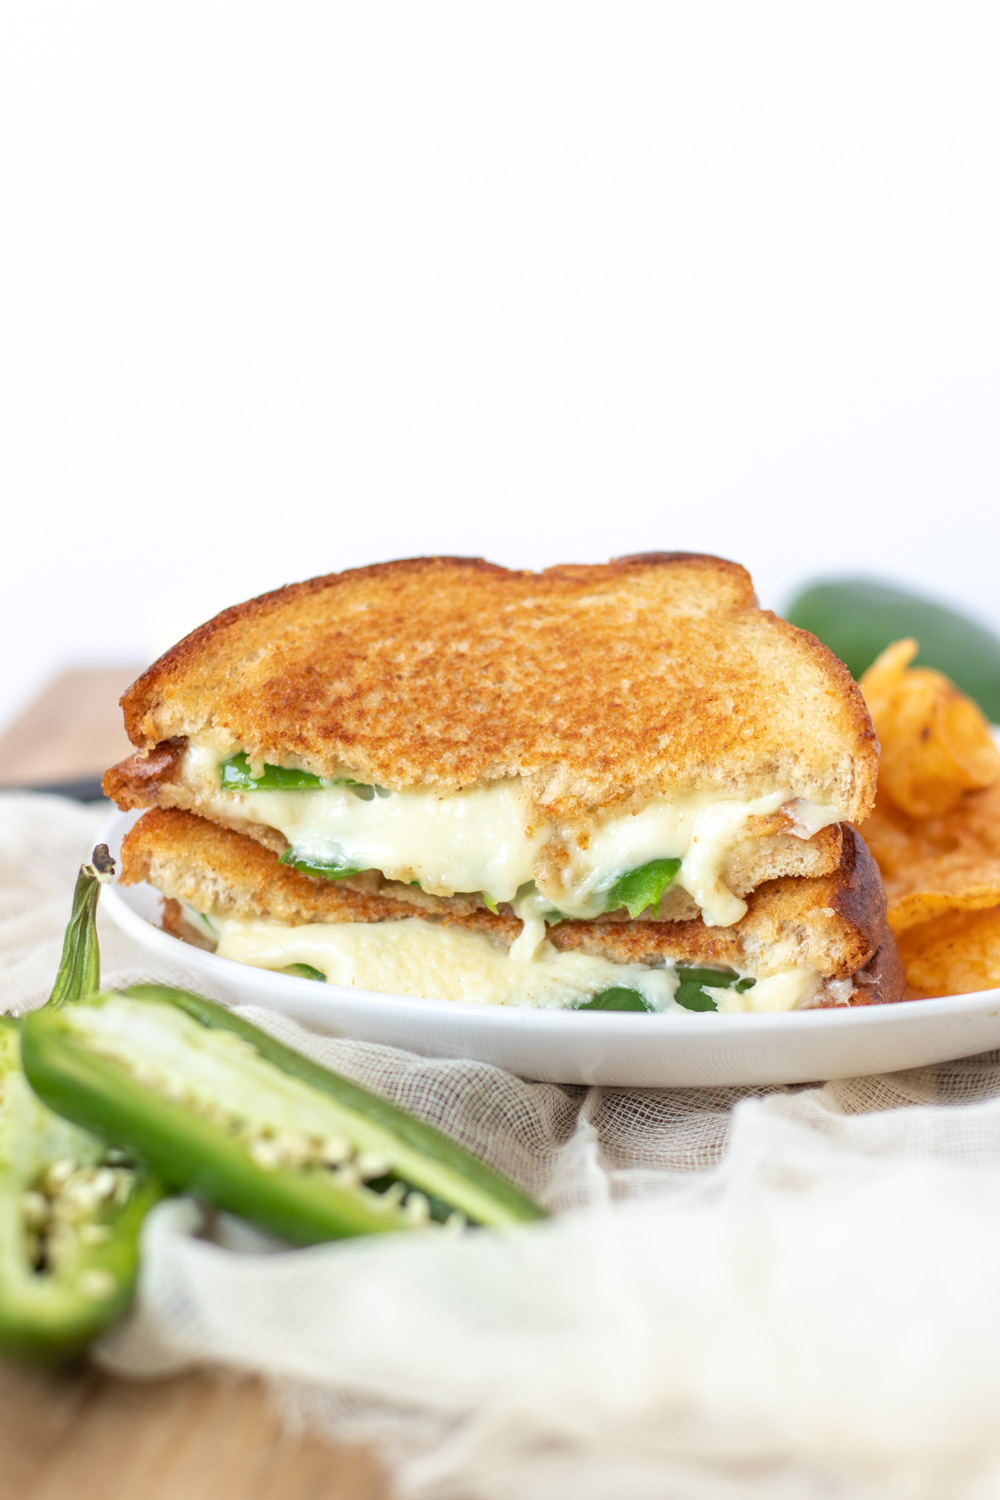 This 4-ingredient, 15-minute lunch takes the classic grilled cheese and turns it into a grown up grilled cheese. This elevated Jalapeño Popper Grilled Cheese uses Monterey Jack Cheese and fresh jalapeños to make a deli-style meal just like your favorite appetizer.